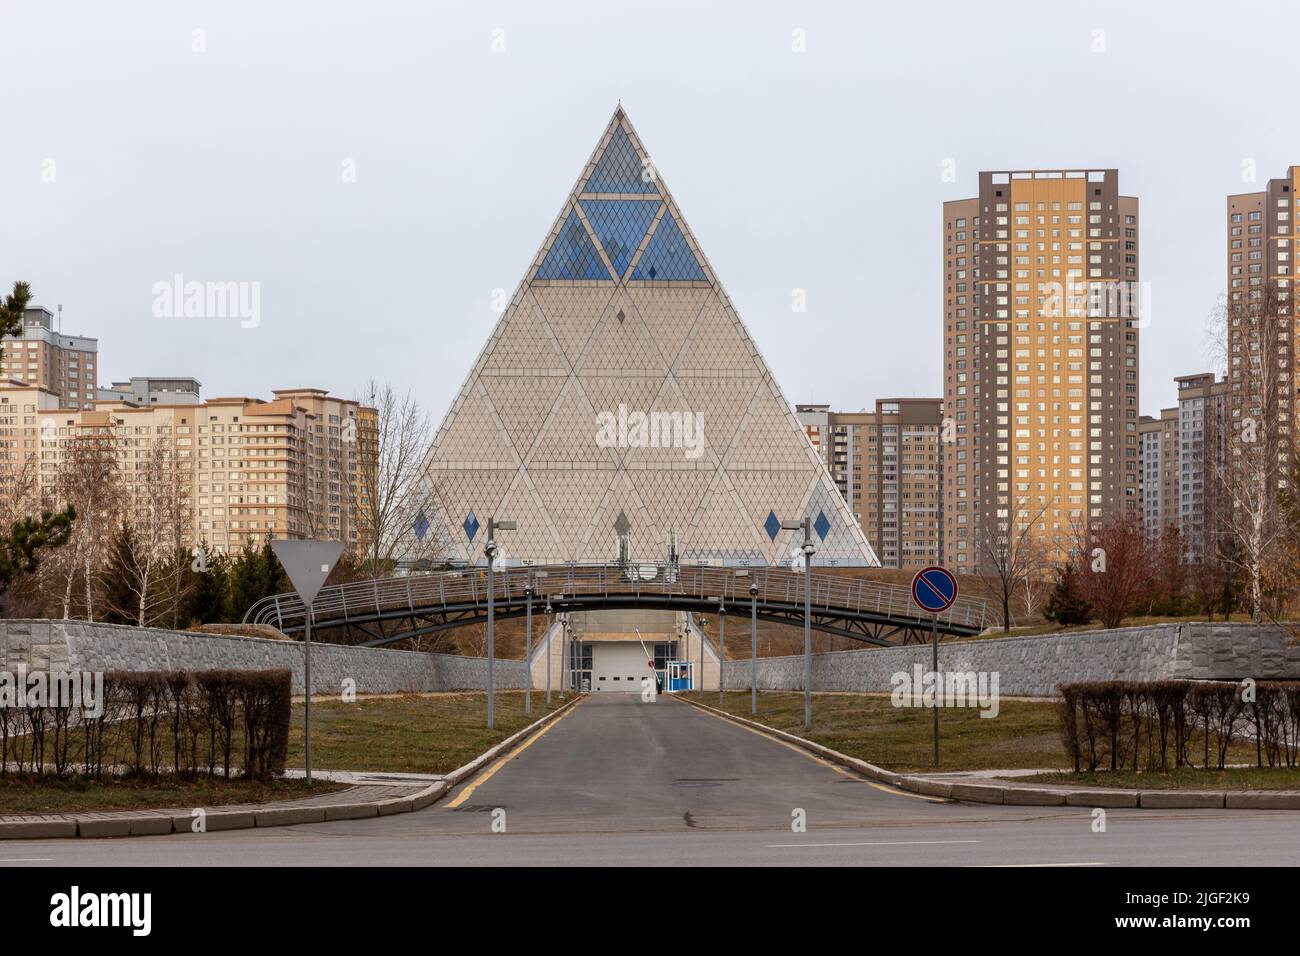 Nur Sultan (Astana), Kazakhstan, 11.11.21. Palace of Peace and Reconciliation, iconic pyramid-shaped glass and steel cultural center with a conference Stock Photo